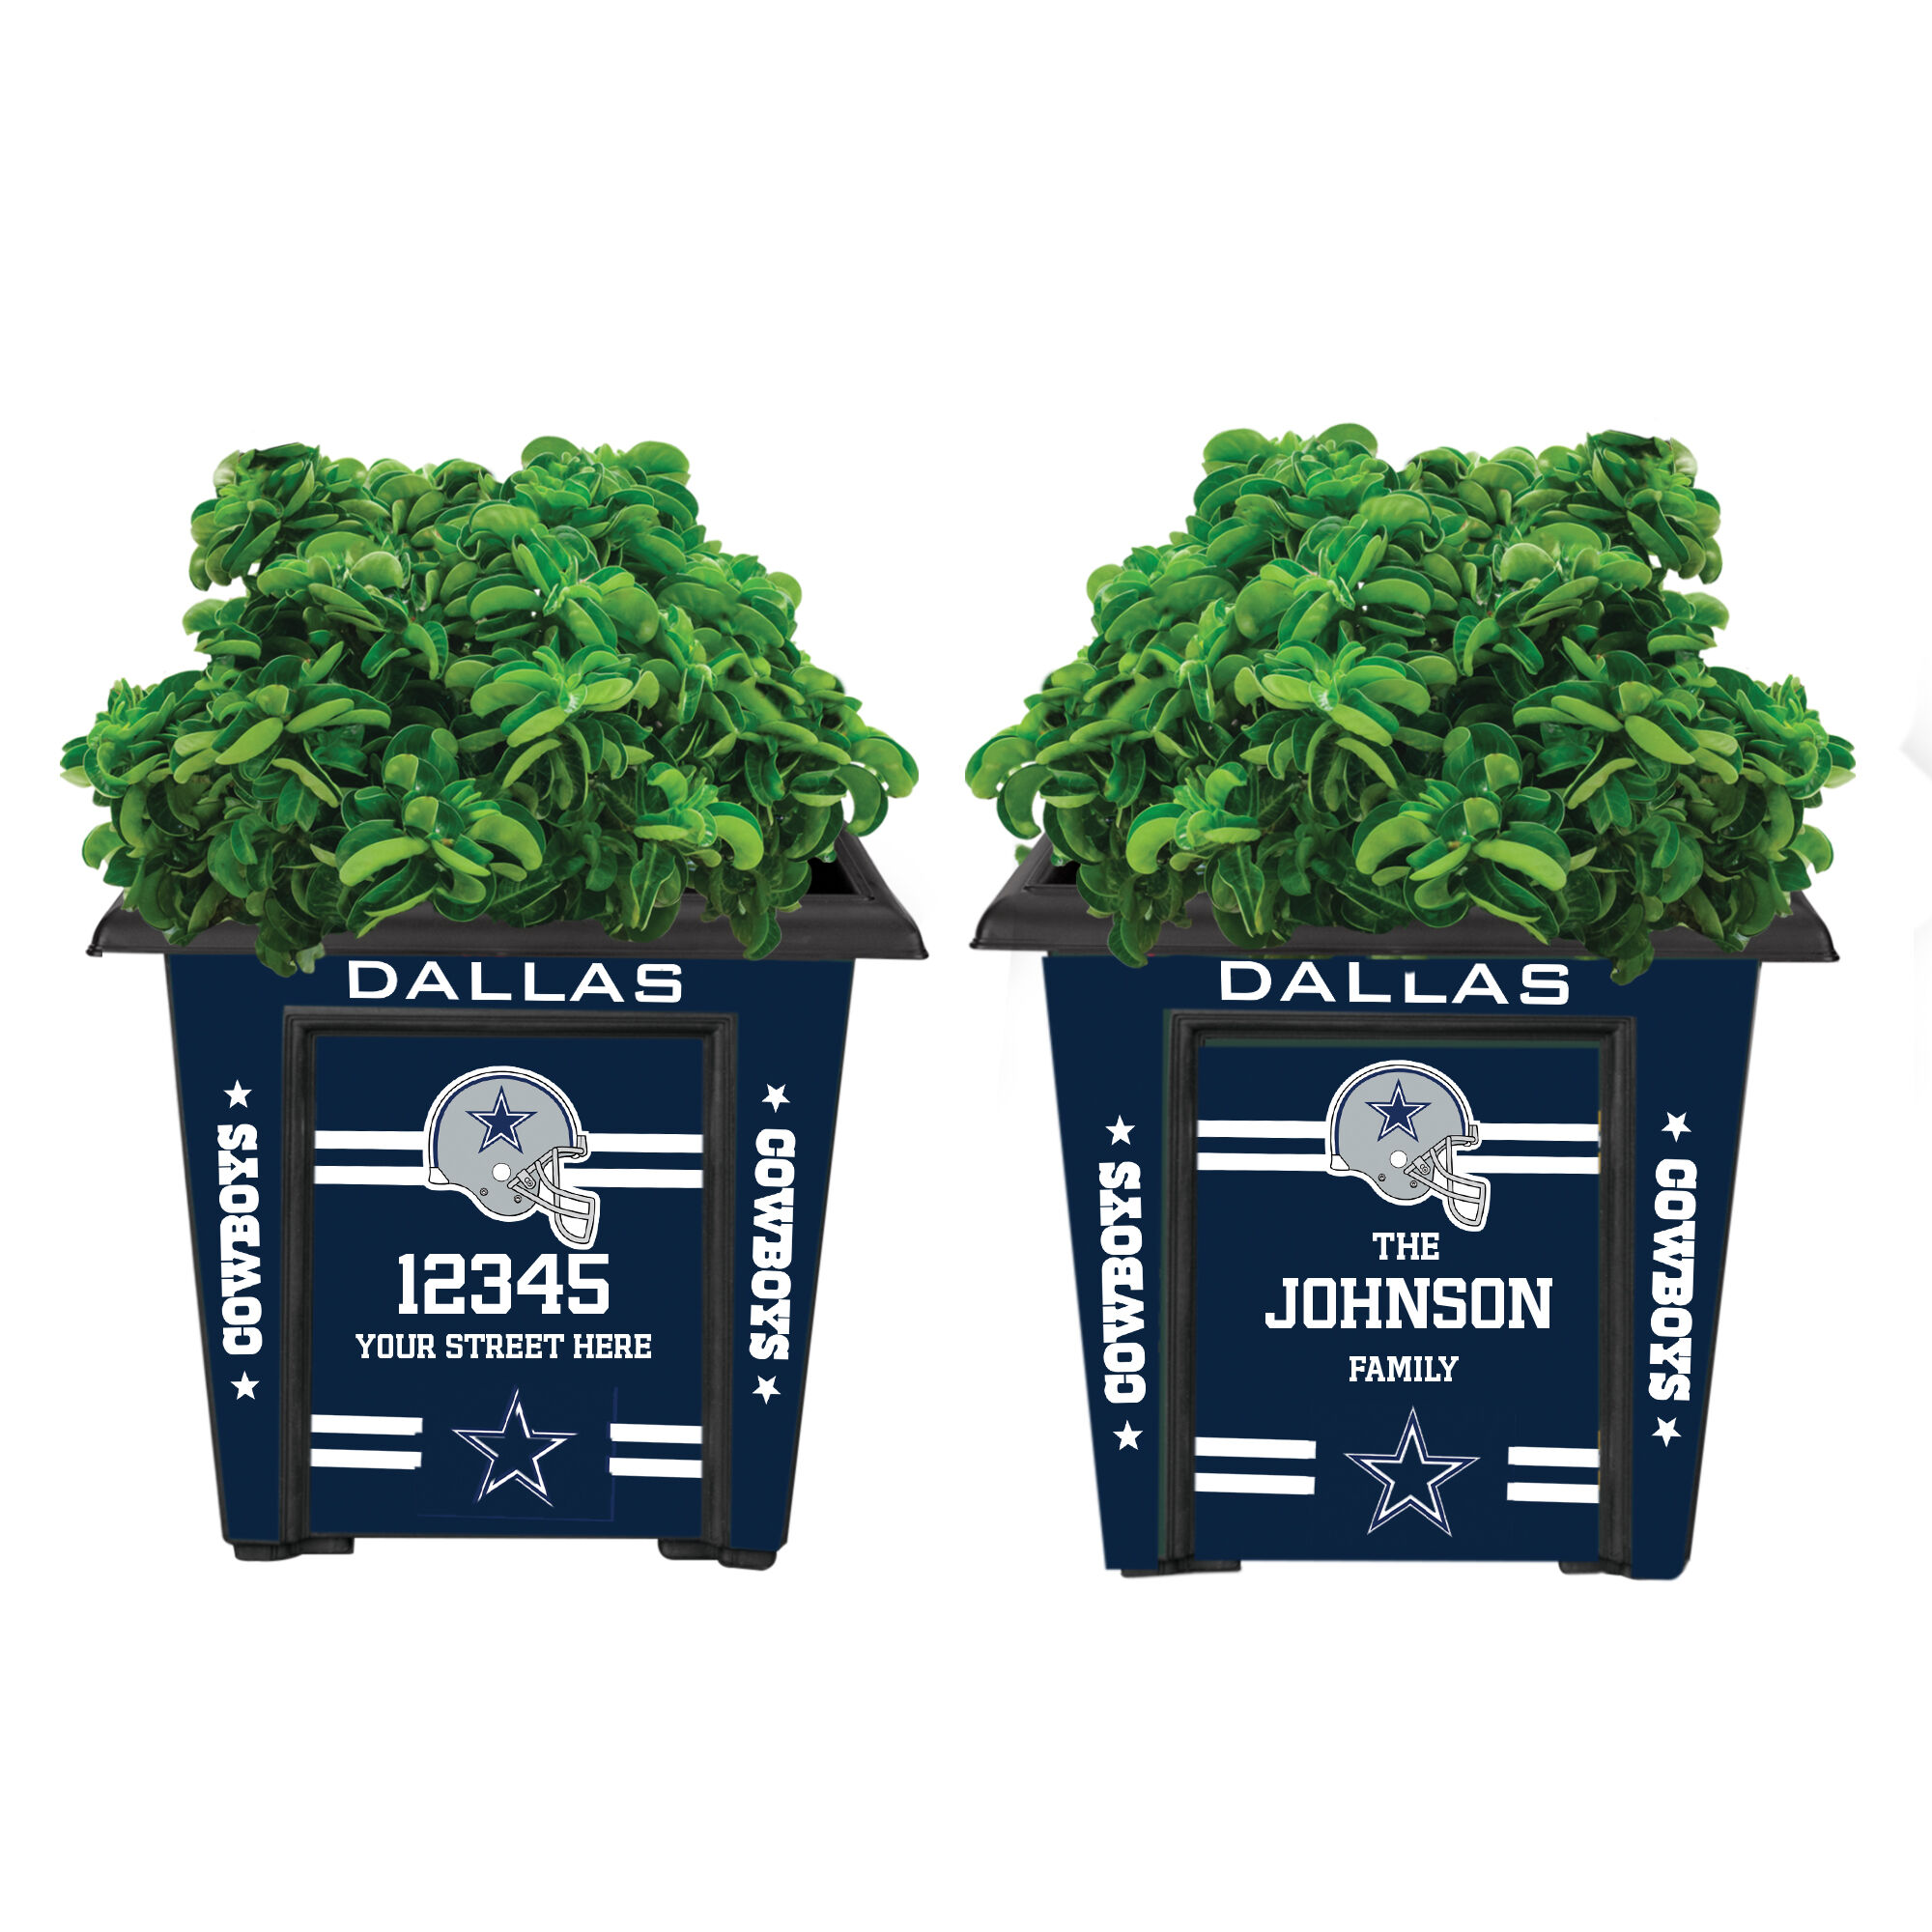 The NFL Personalized Planters 1929 0048 a cowboys